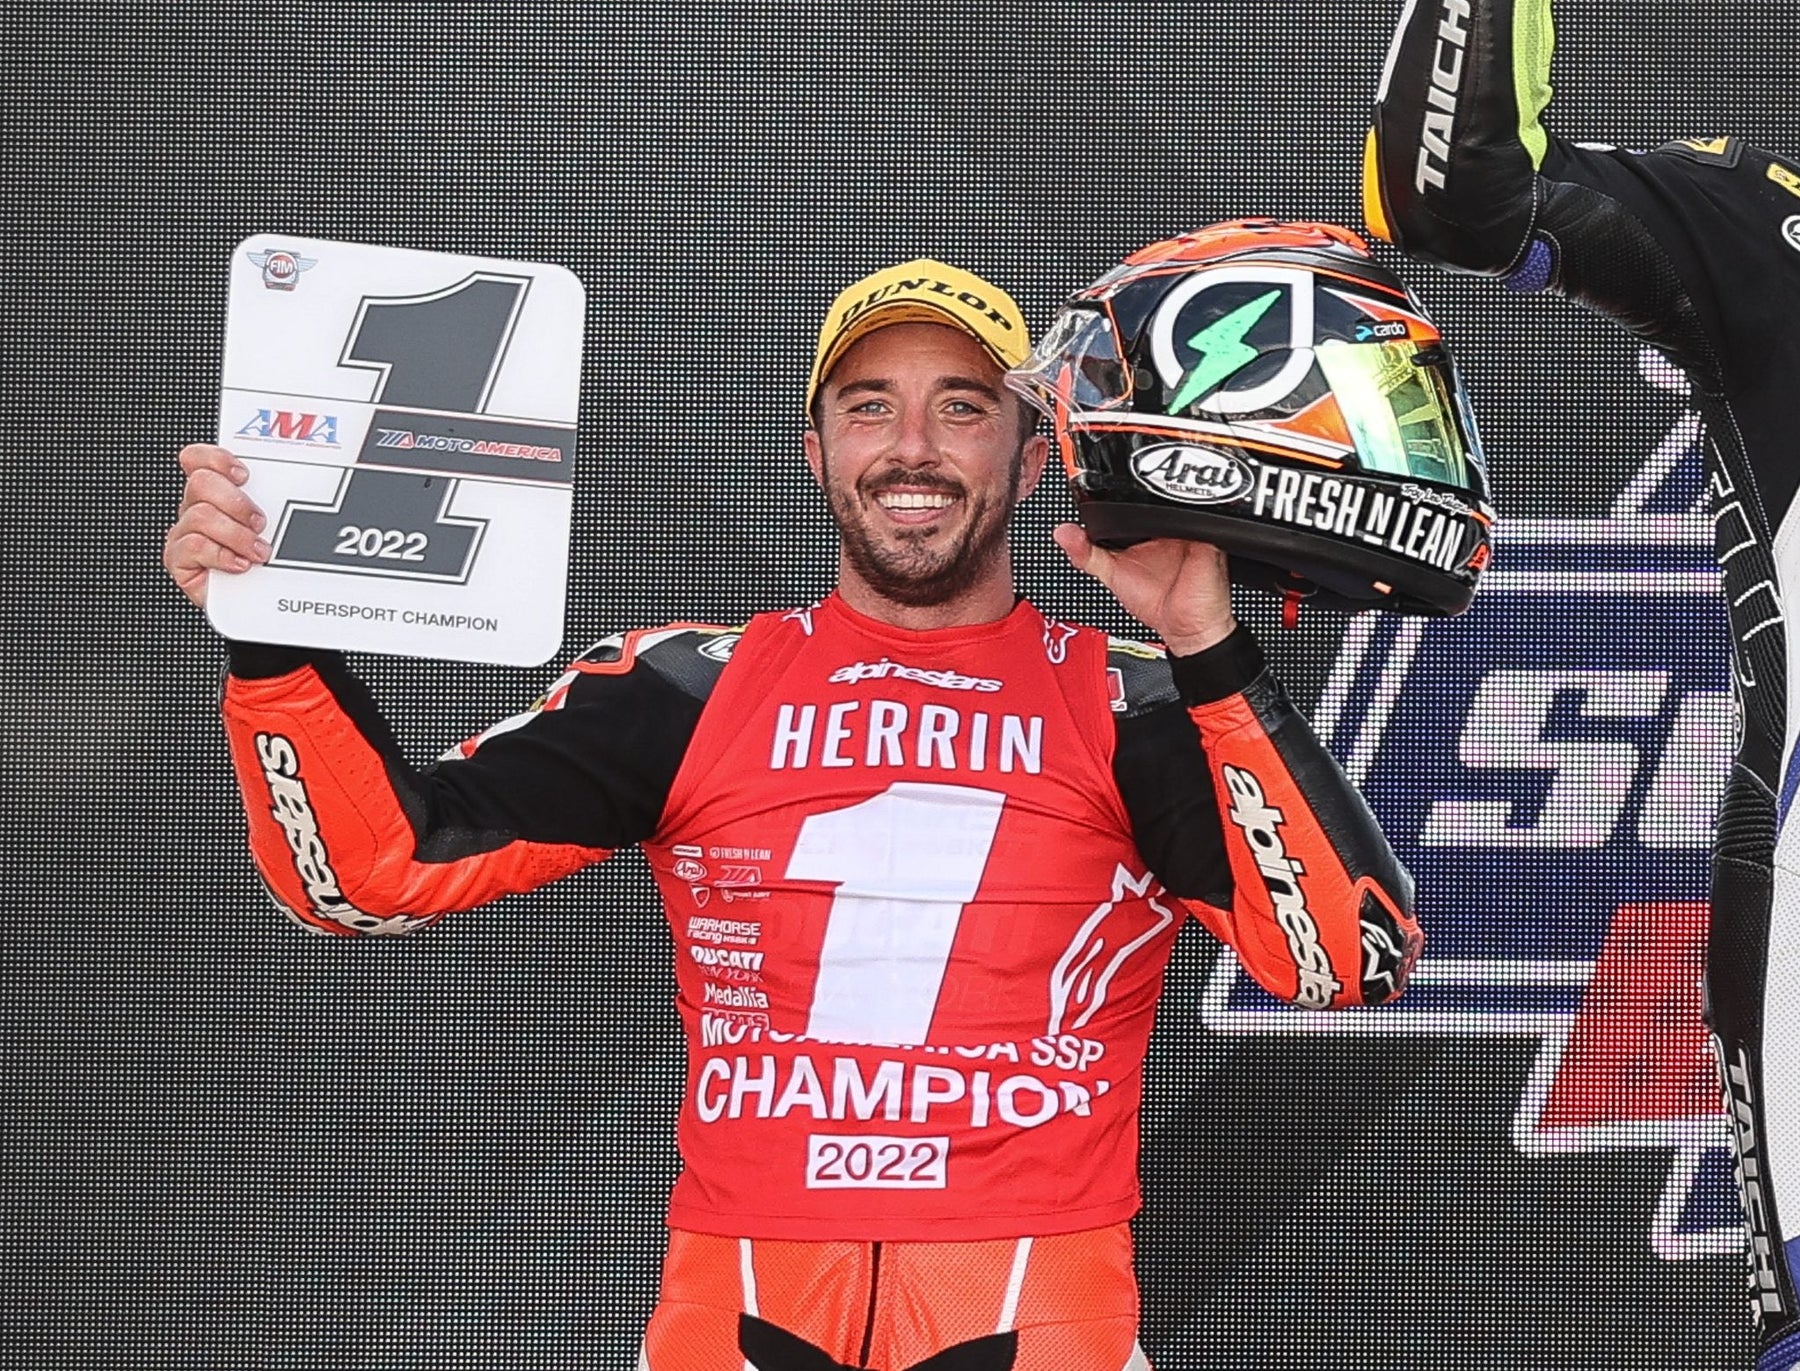 JOSH HERRIN CROWNED 2022 MOTO AMERICA SUPERSPORT CHAMPION AFTER SECOND PLACE FINISH IN NEW JERSEY